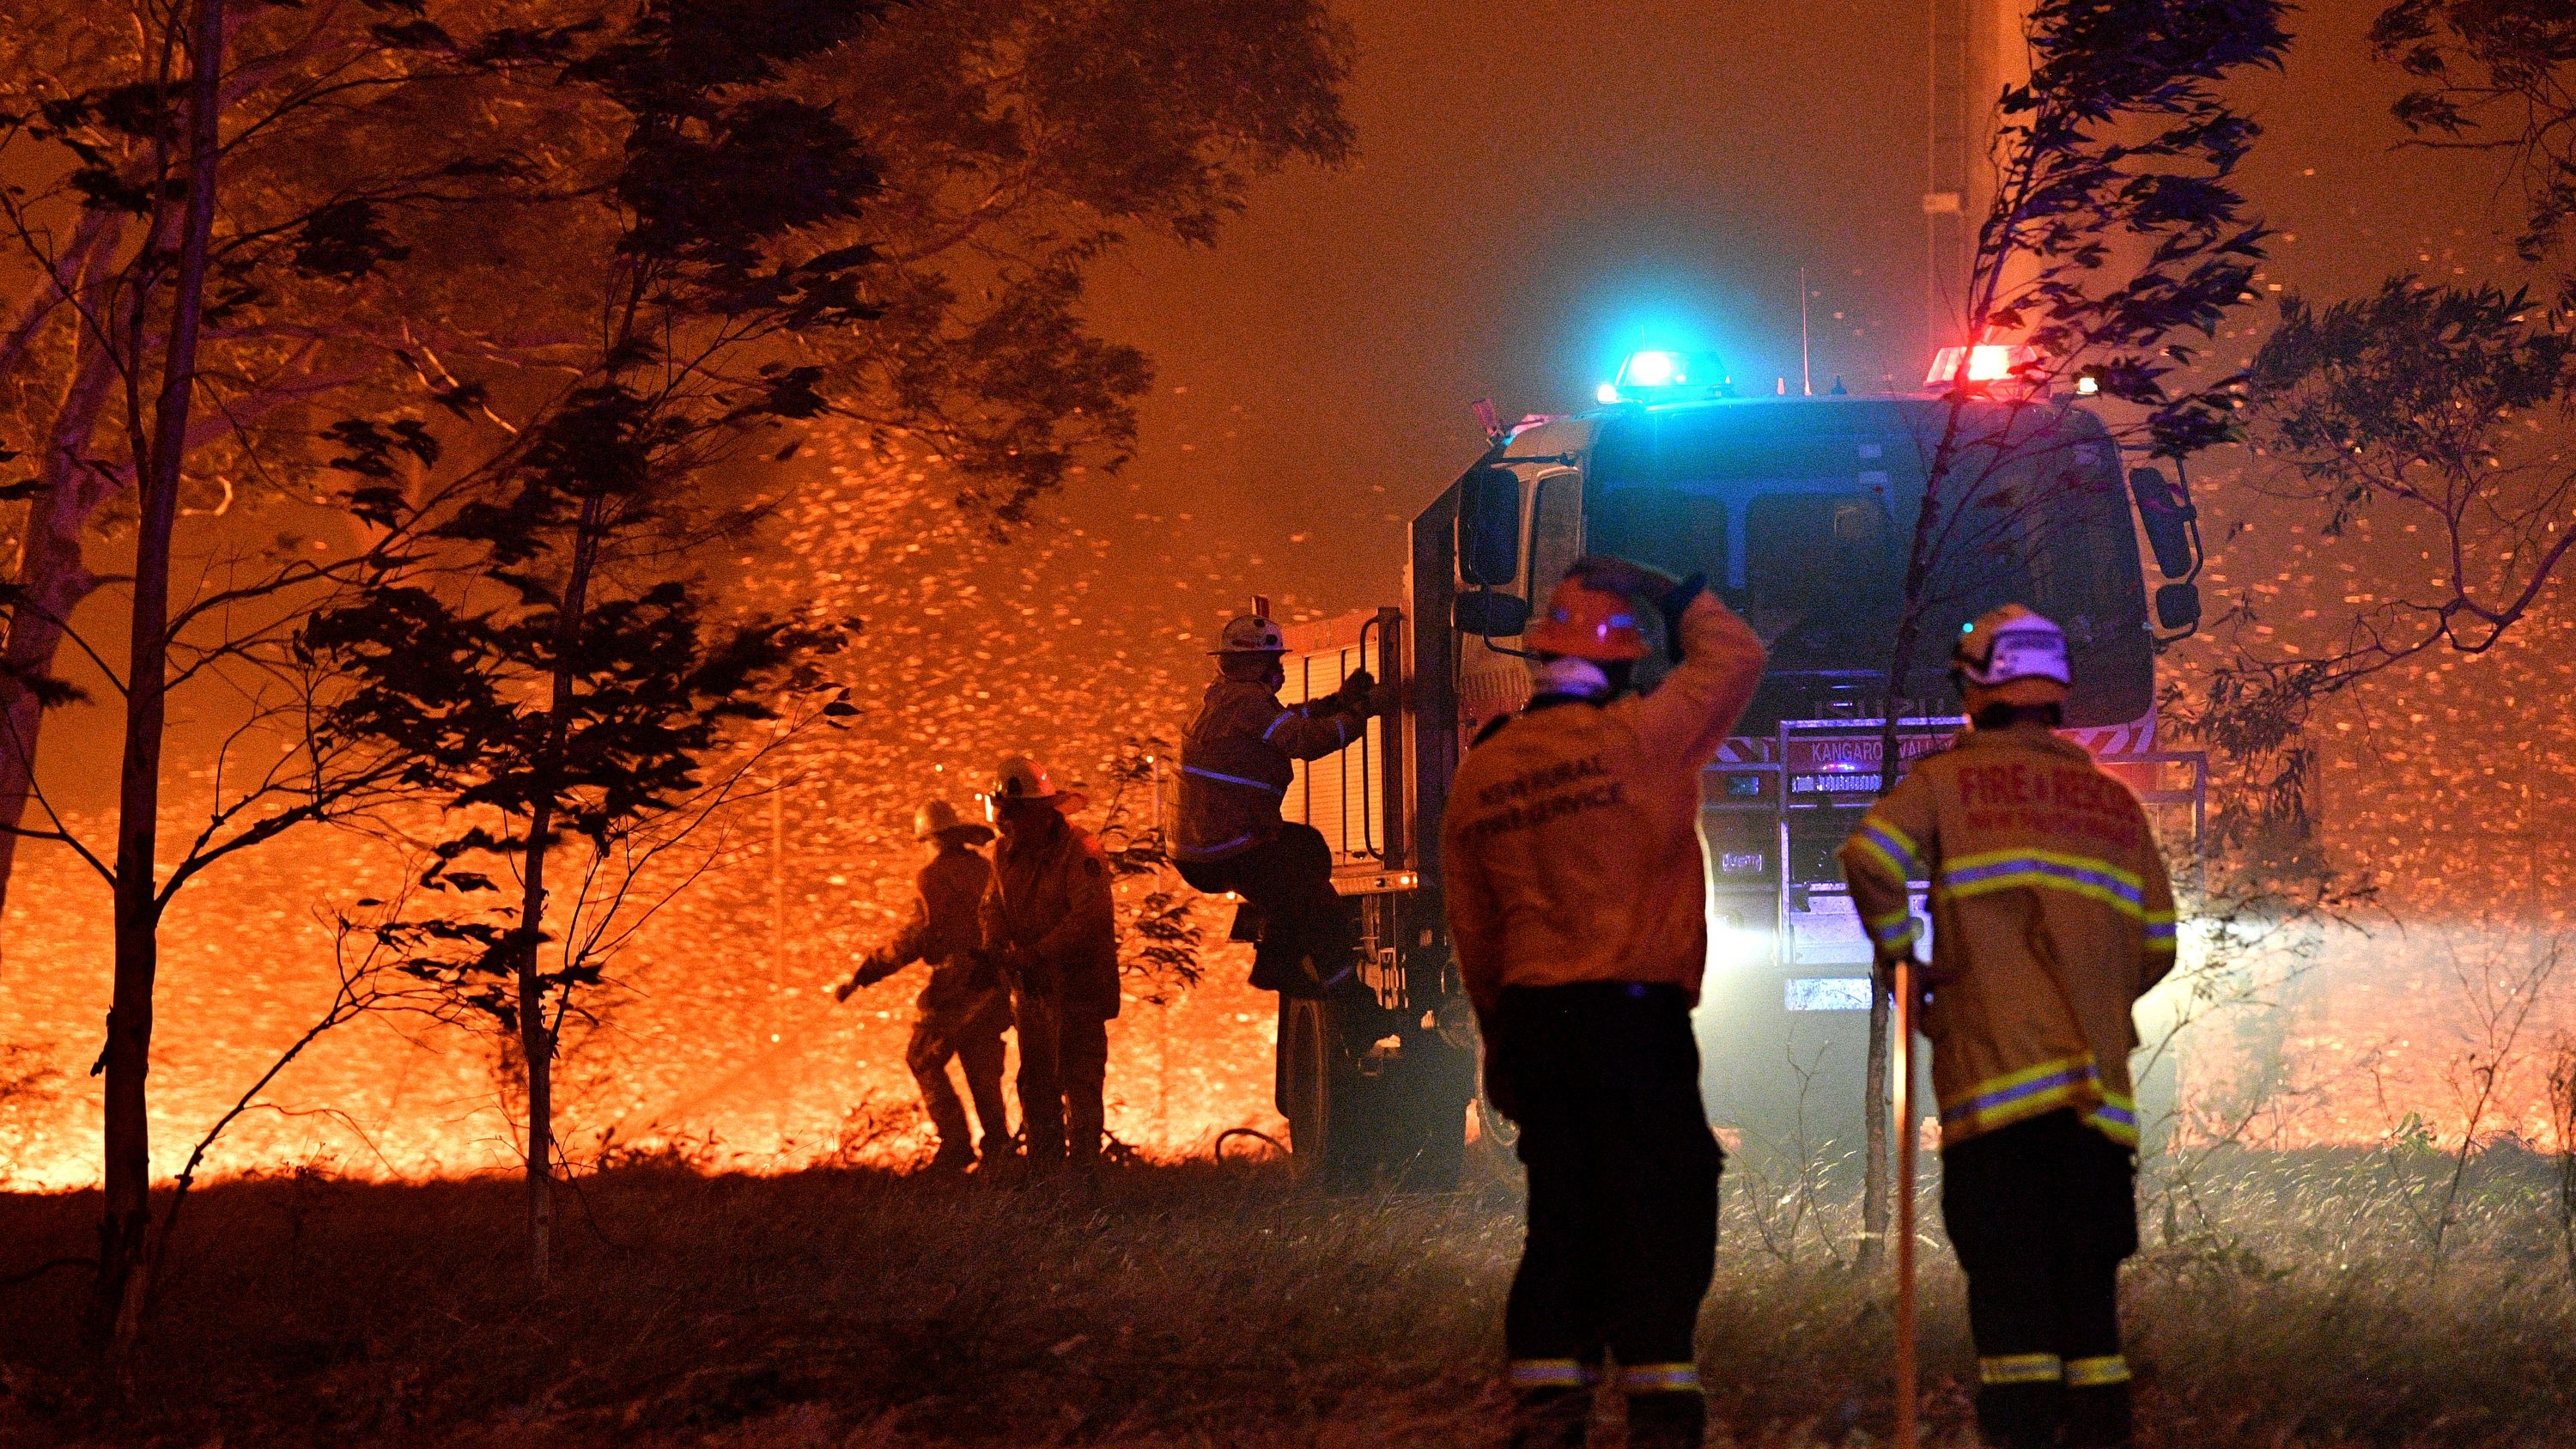 Firefighters hose down trees in a bid to slow the spread of bushfires around Nowra in Australia